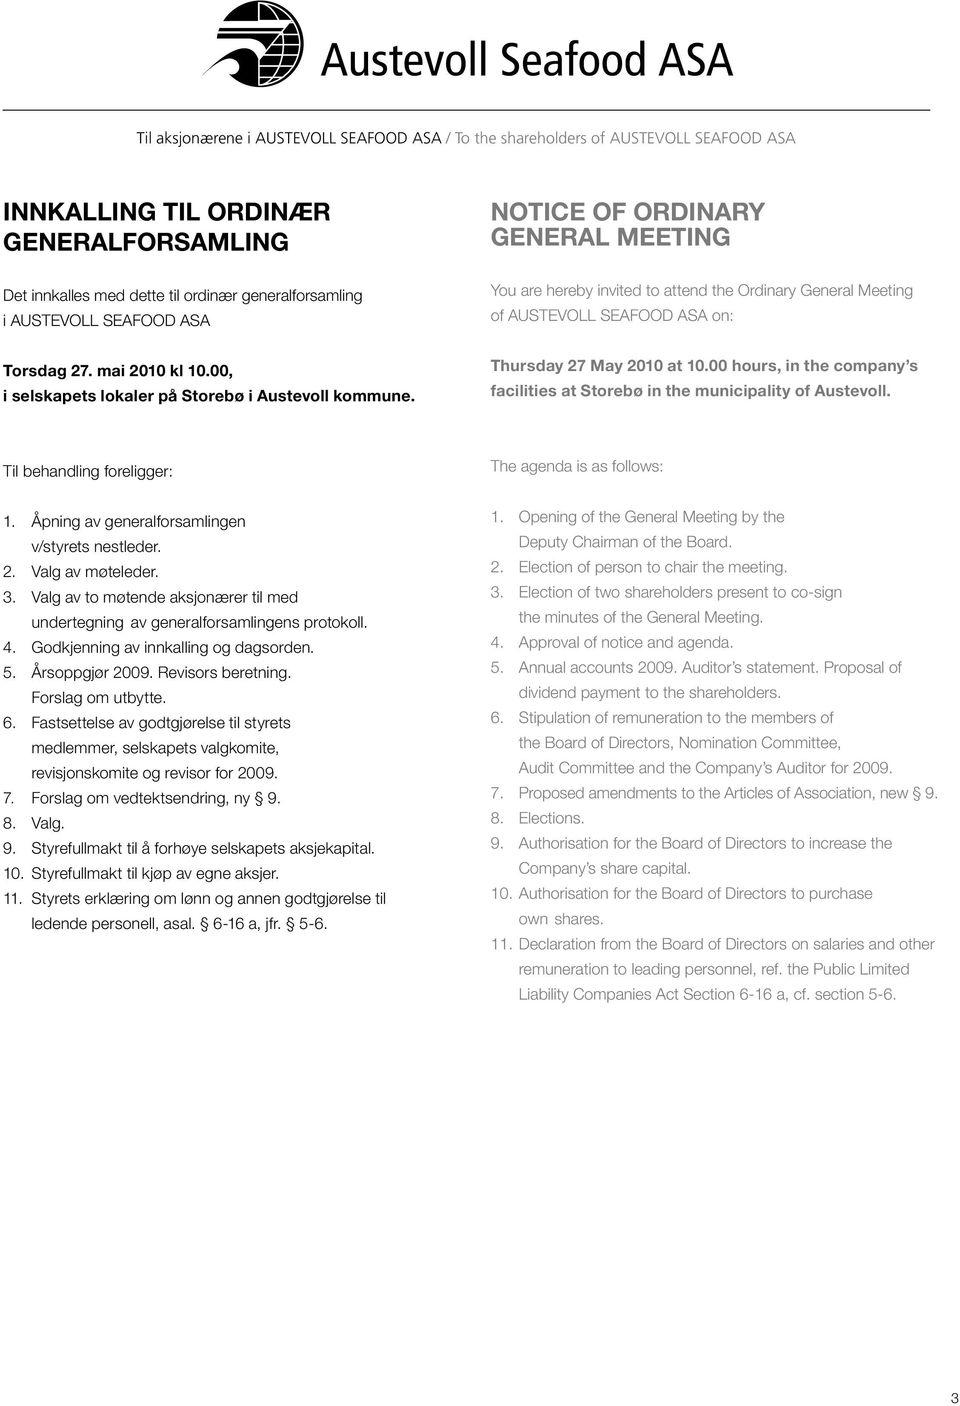 NOTICE OF ORDINARY GENERAL MEETING You are hereby invited to attend the Ordinary General Meeting of AUSTEVOLL SEAFOOD ASA on: Thursday 27 May 2010 at 10.